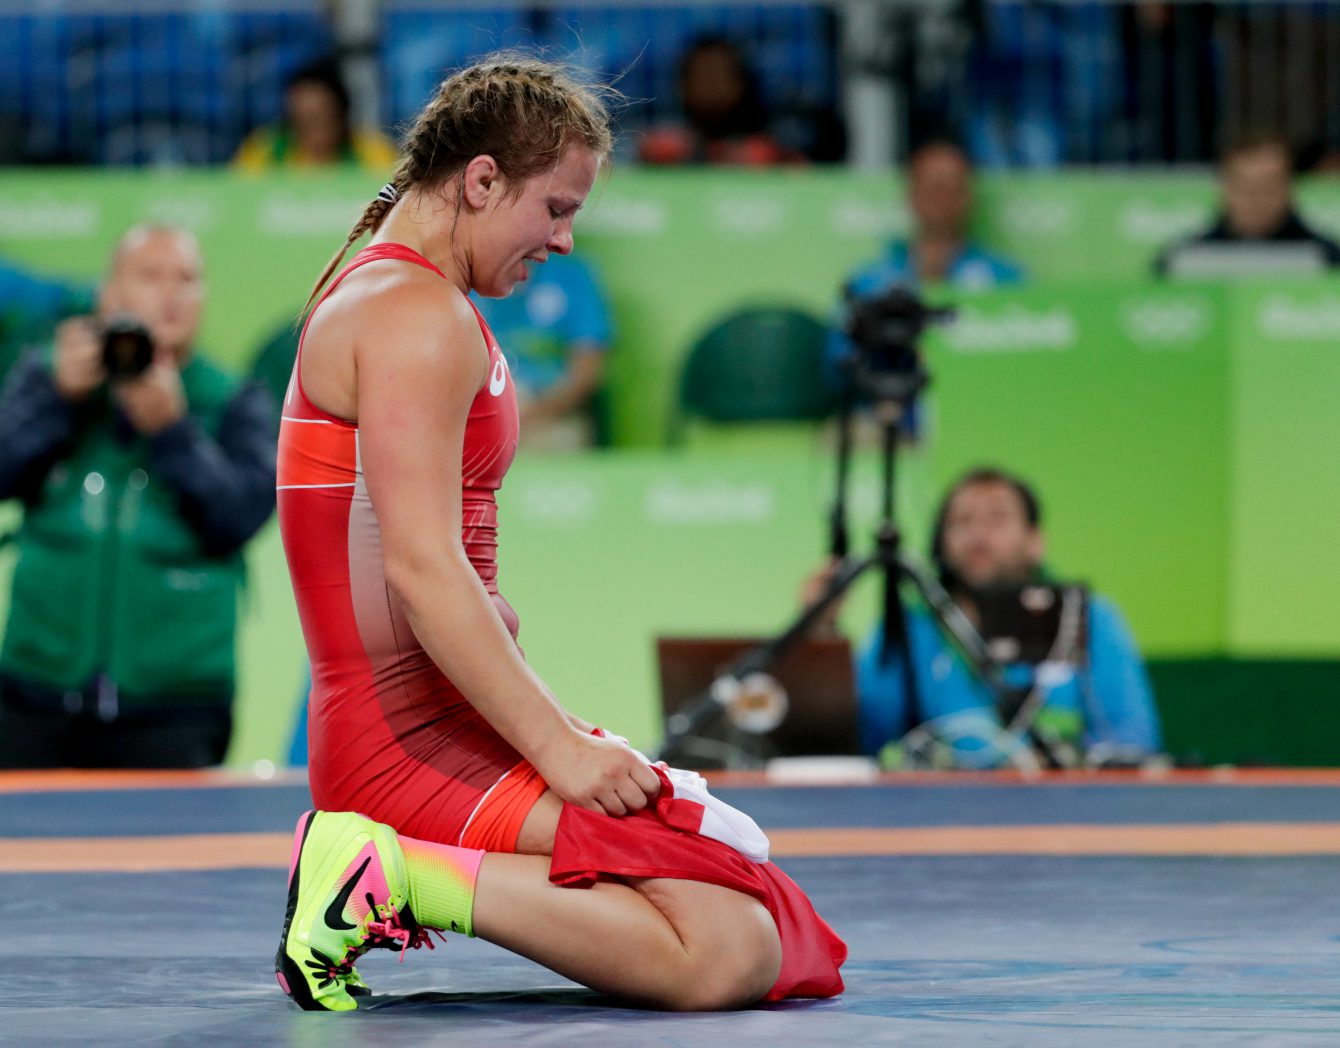 Canada's Erica Wiebe, after defeating Kazakhstan's Guzel Manyurova during the women's 75kg freestyle wrestling competition at the 2016 Summer Olympics in Rio de Janeiro, Brazil, Thursday, Aug. 18, 2016. (COC/ David Jackson)